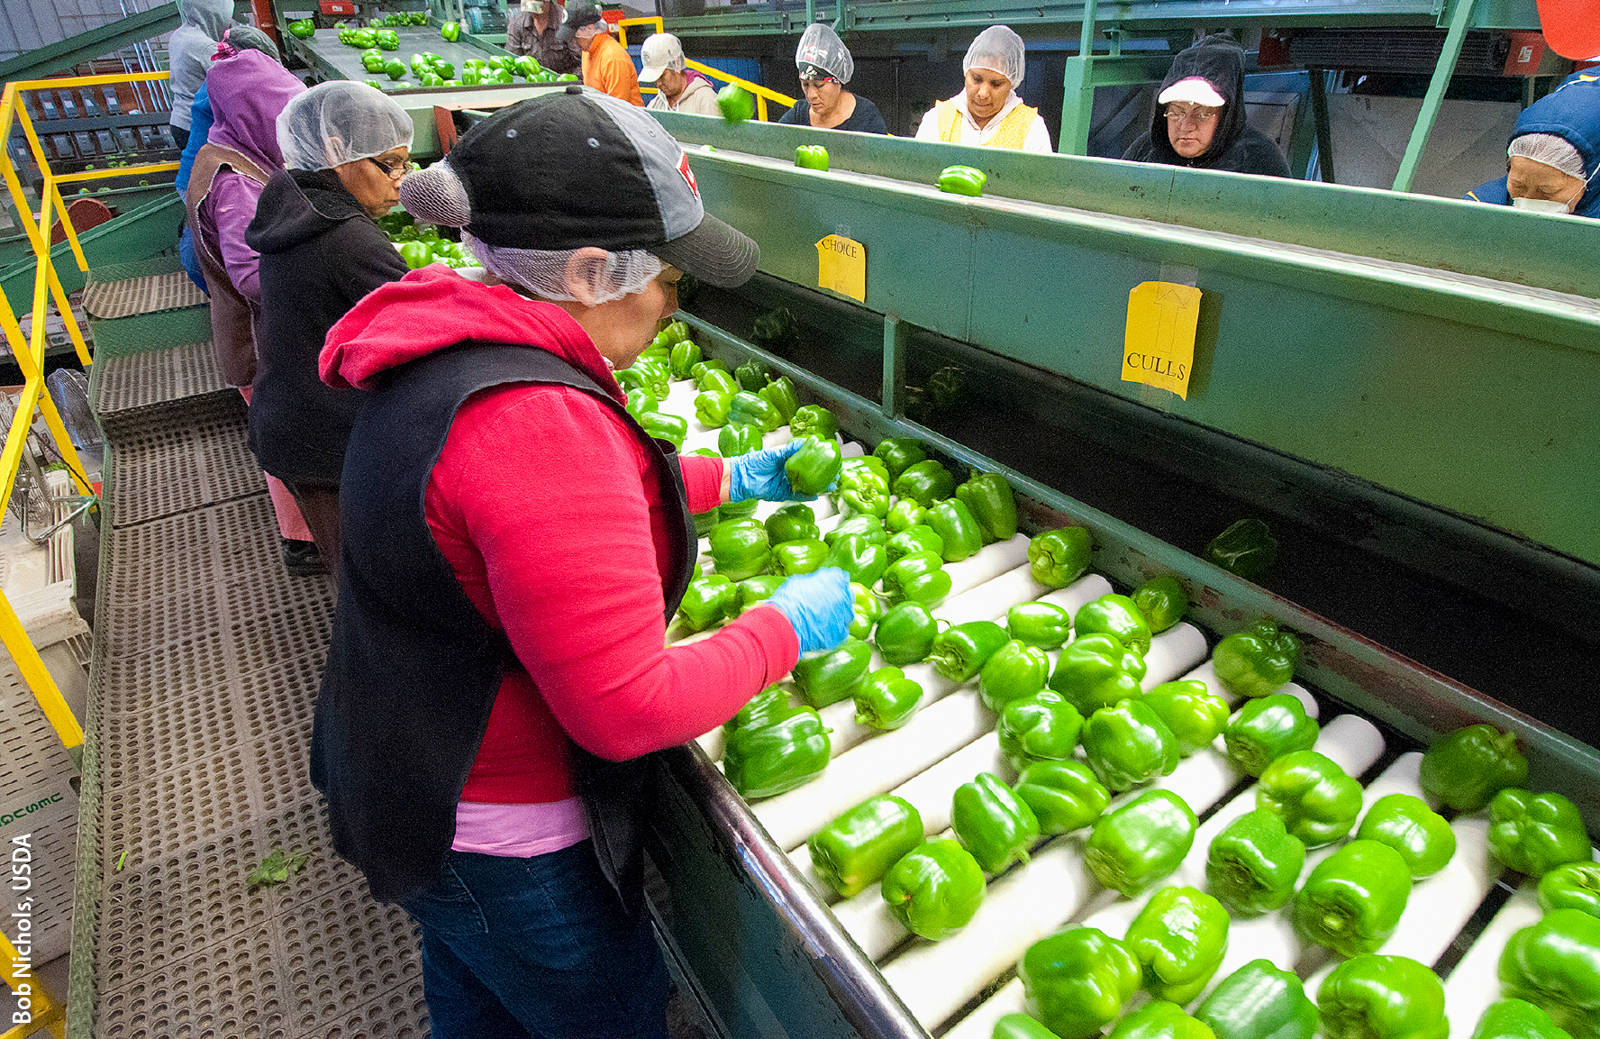 Processing green peppers in Gilroy. In the past 10 years, some farmers have shifted from hiring workers directly to using farm labor contractors to bring workers to their farms. However, research suggests that contractors aren't able to provide full-year work.